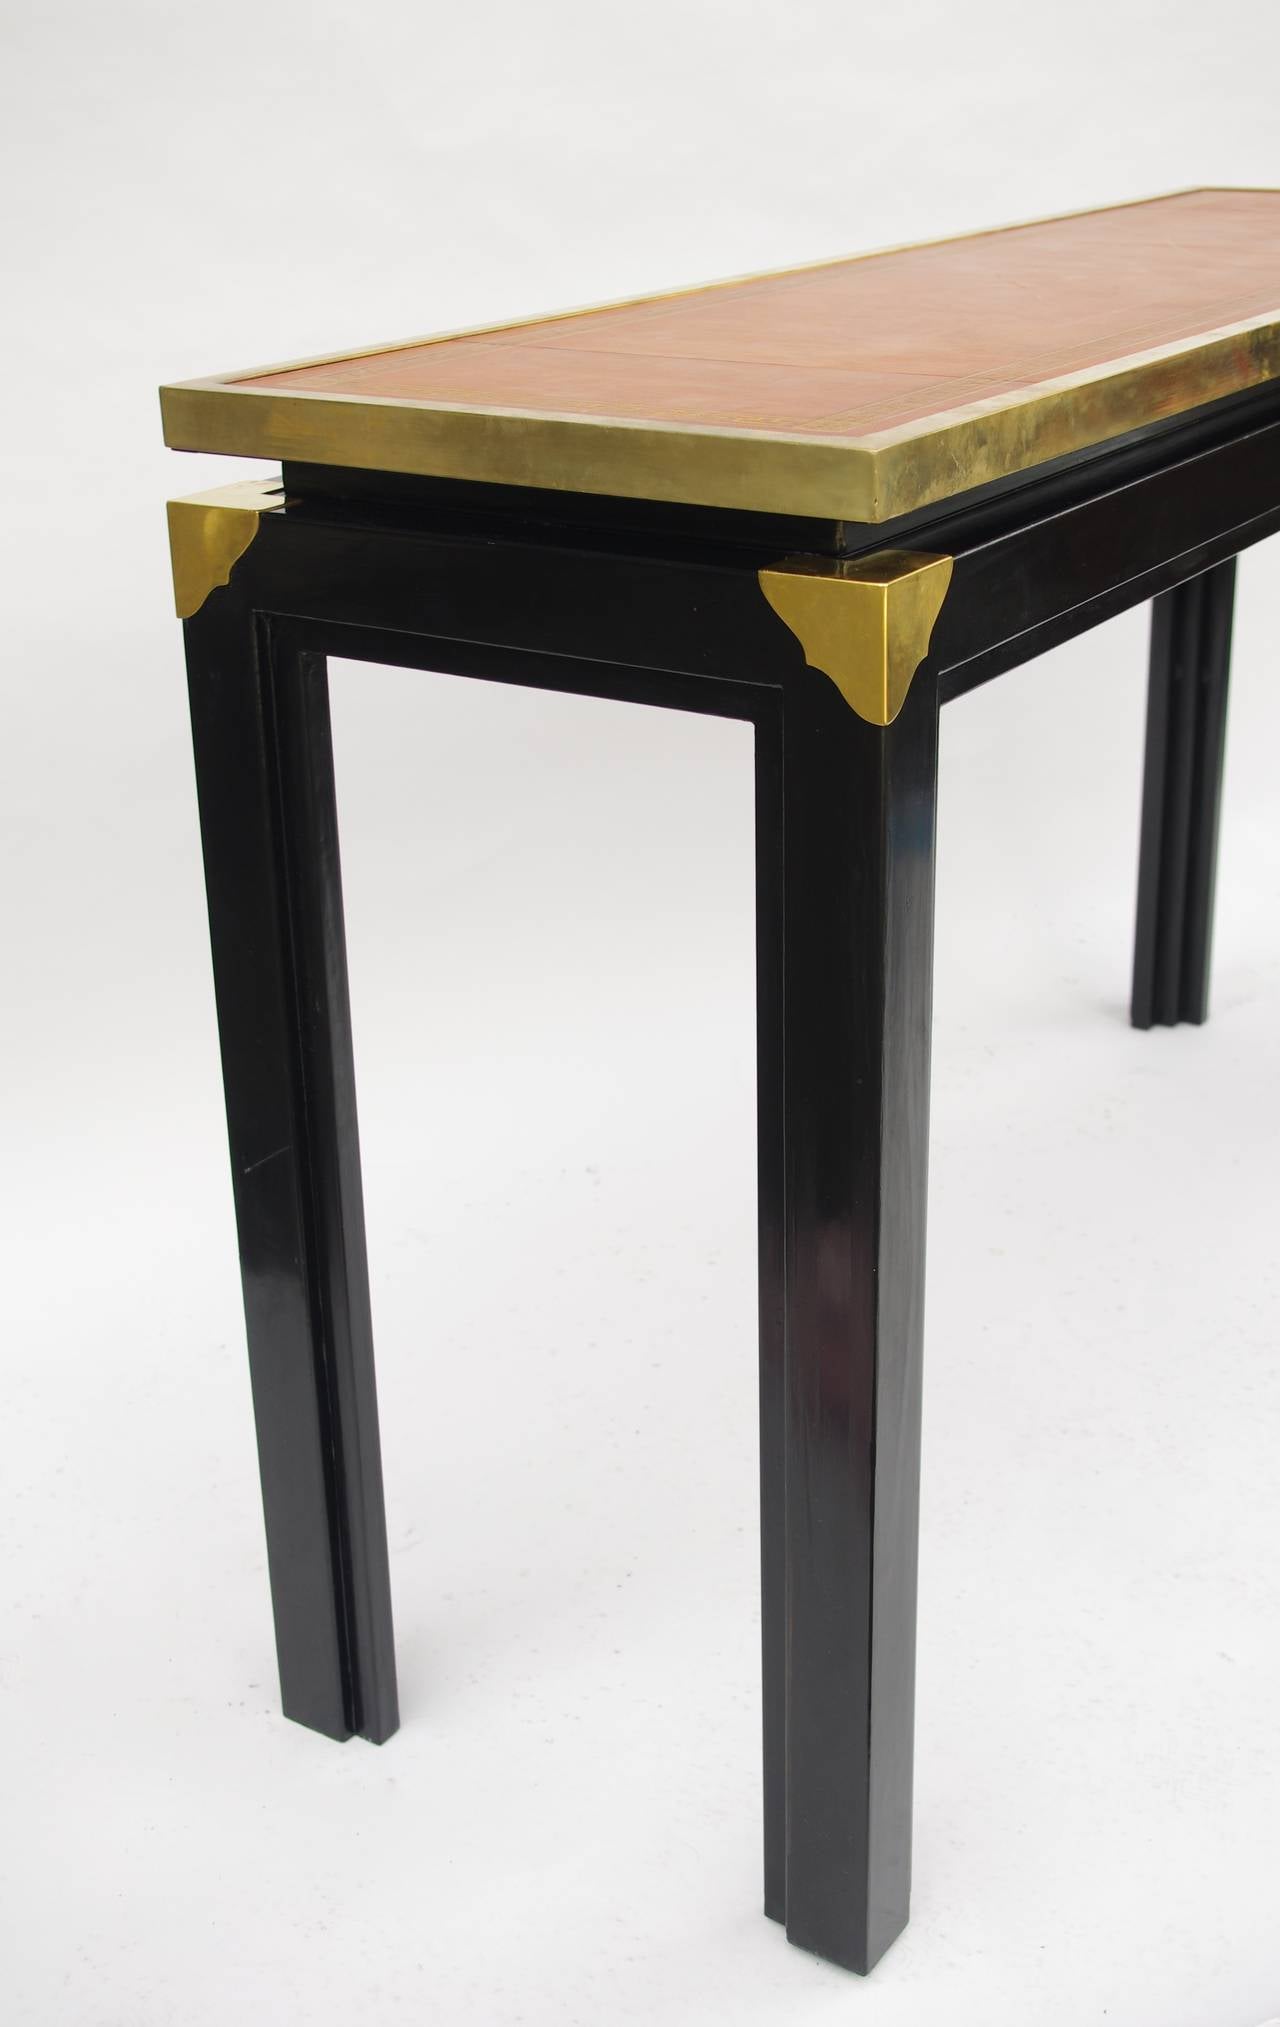 . Black lacquer metal
. Gilt brass
. Brown leather top
. 1970